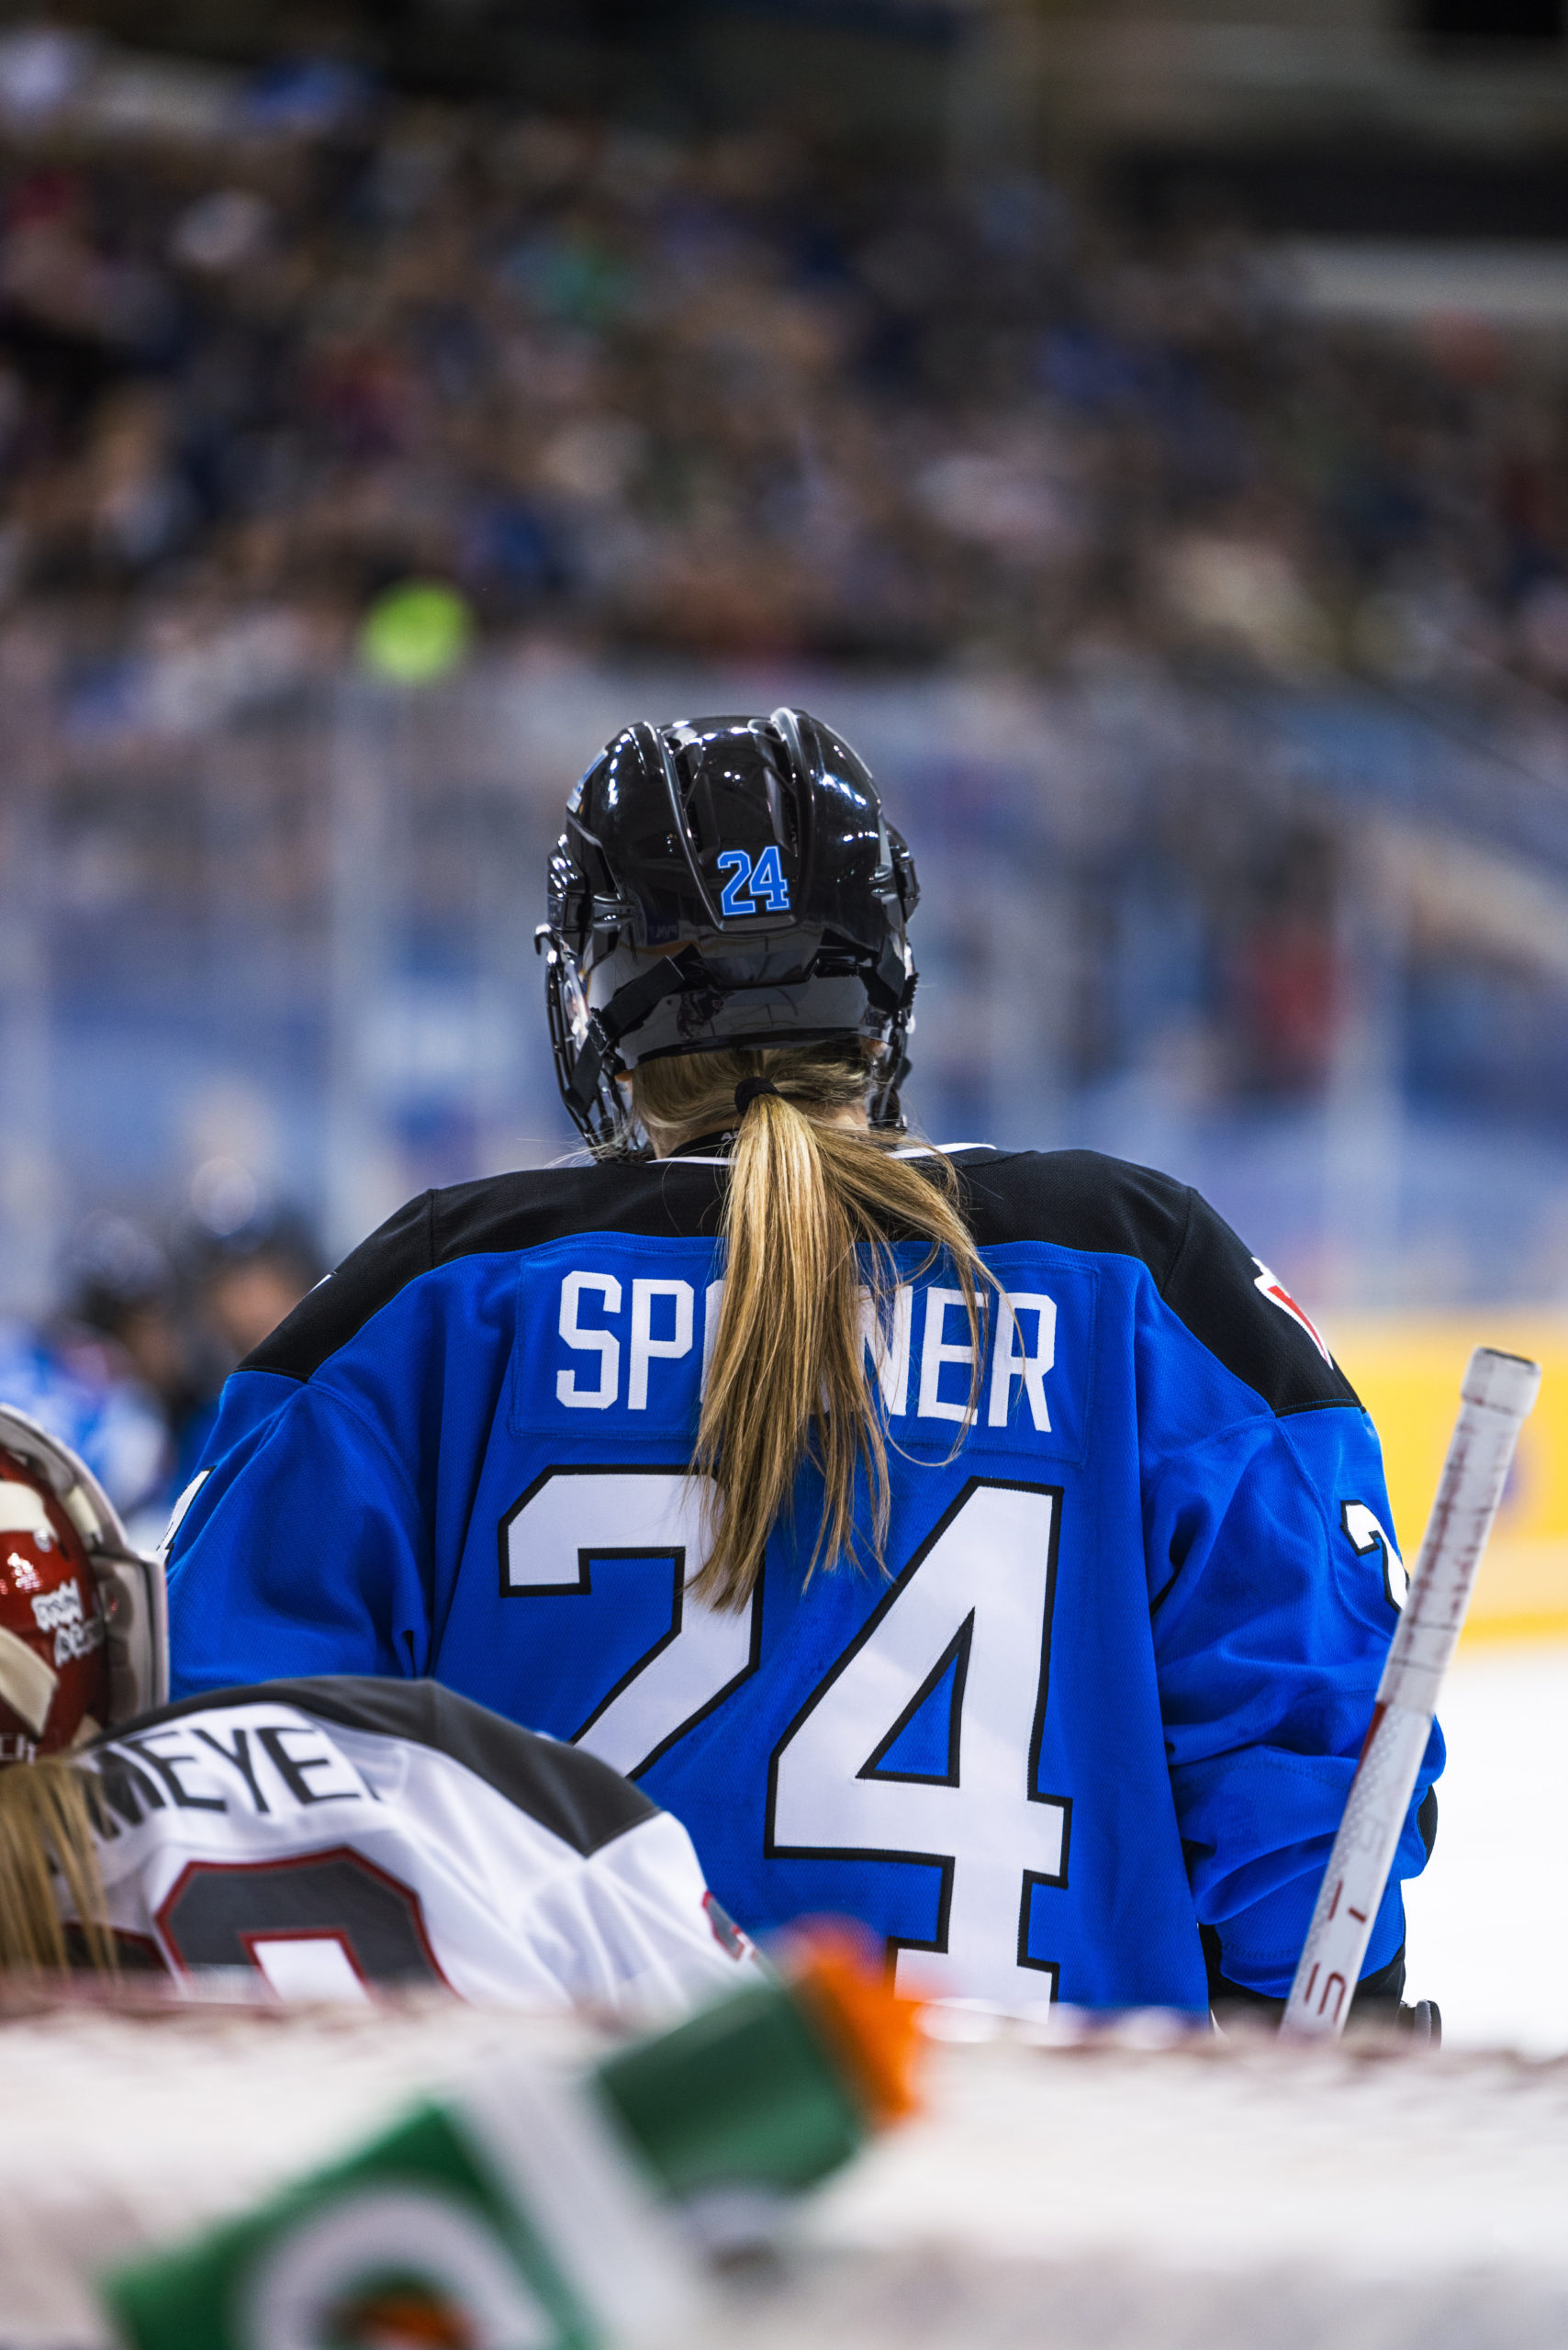 PWHL Toronto player Natalie Spooner stands right in front of the PWHL Ottawa net